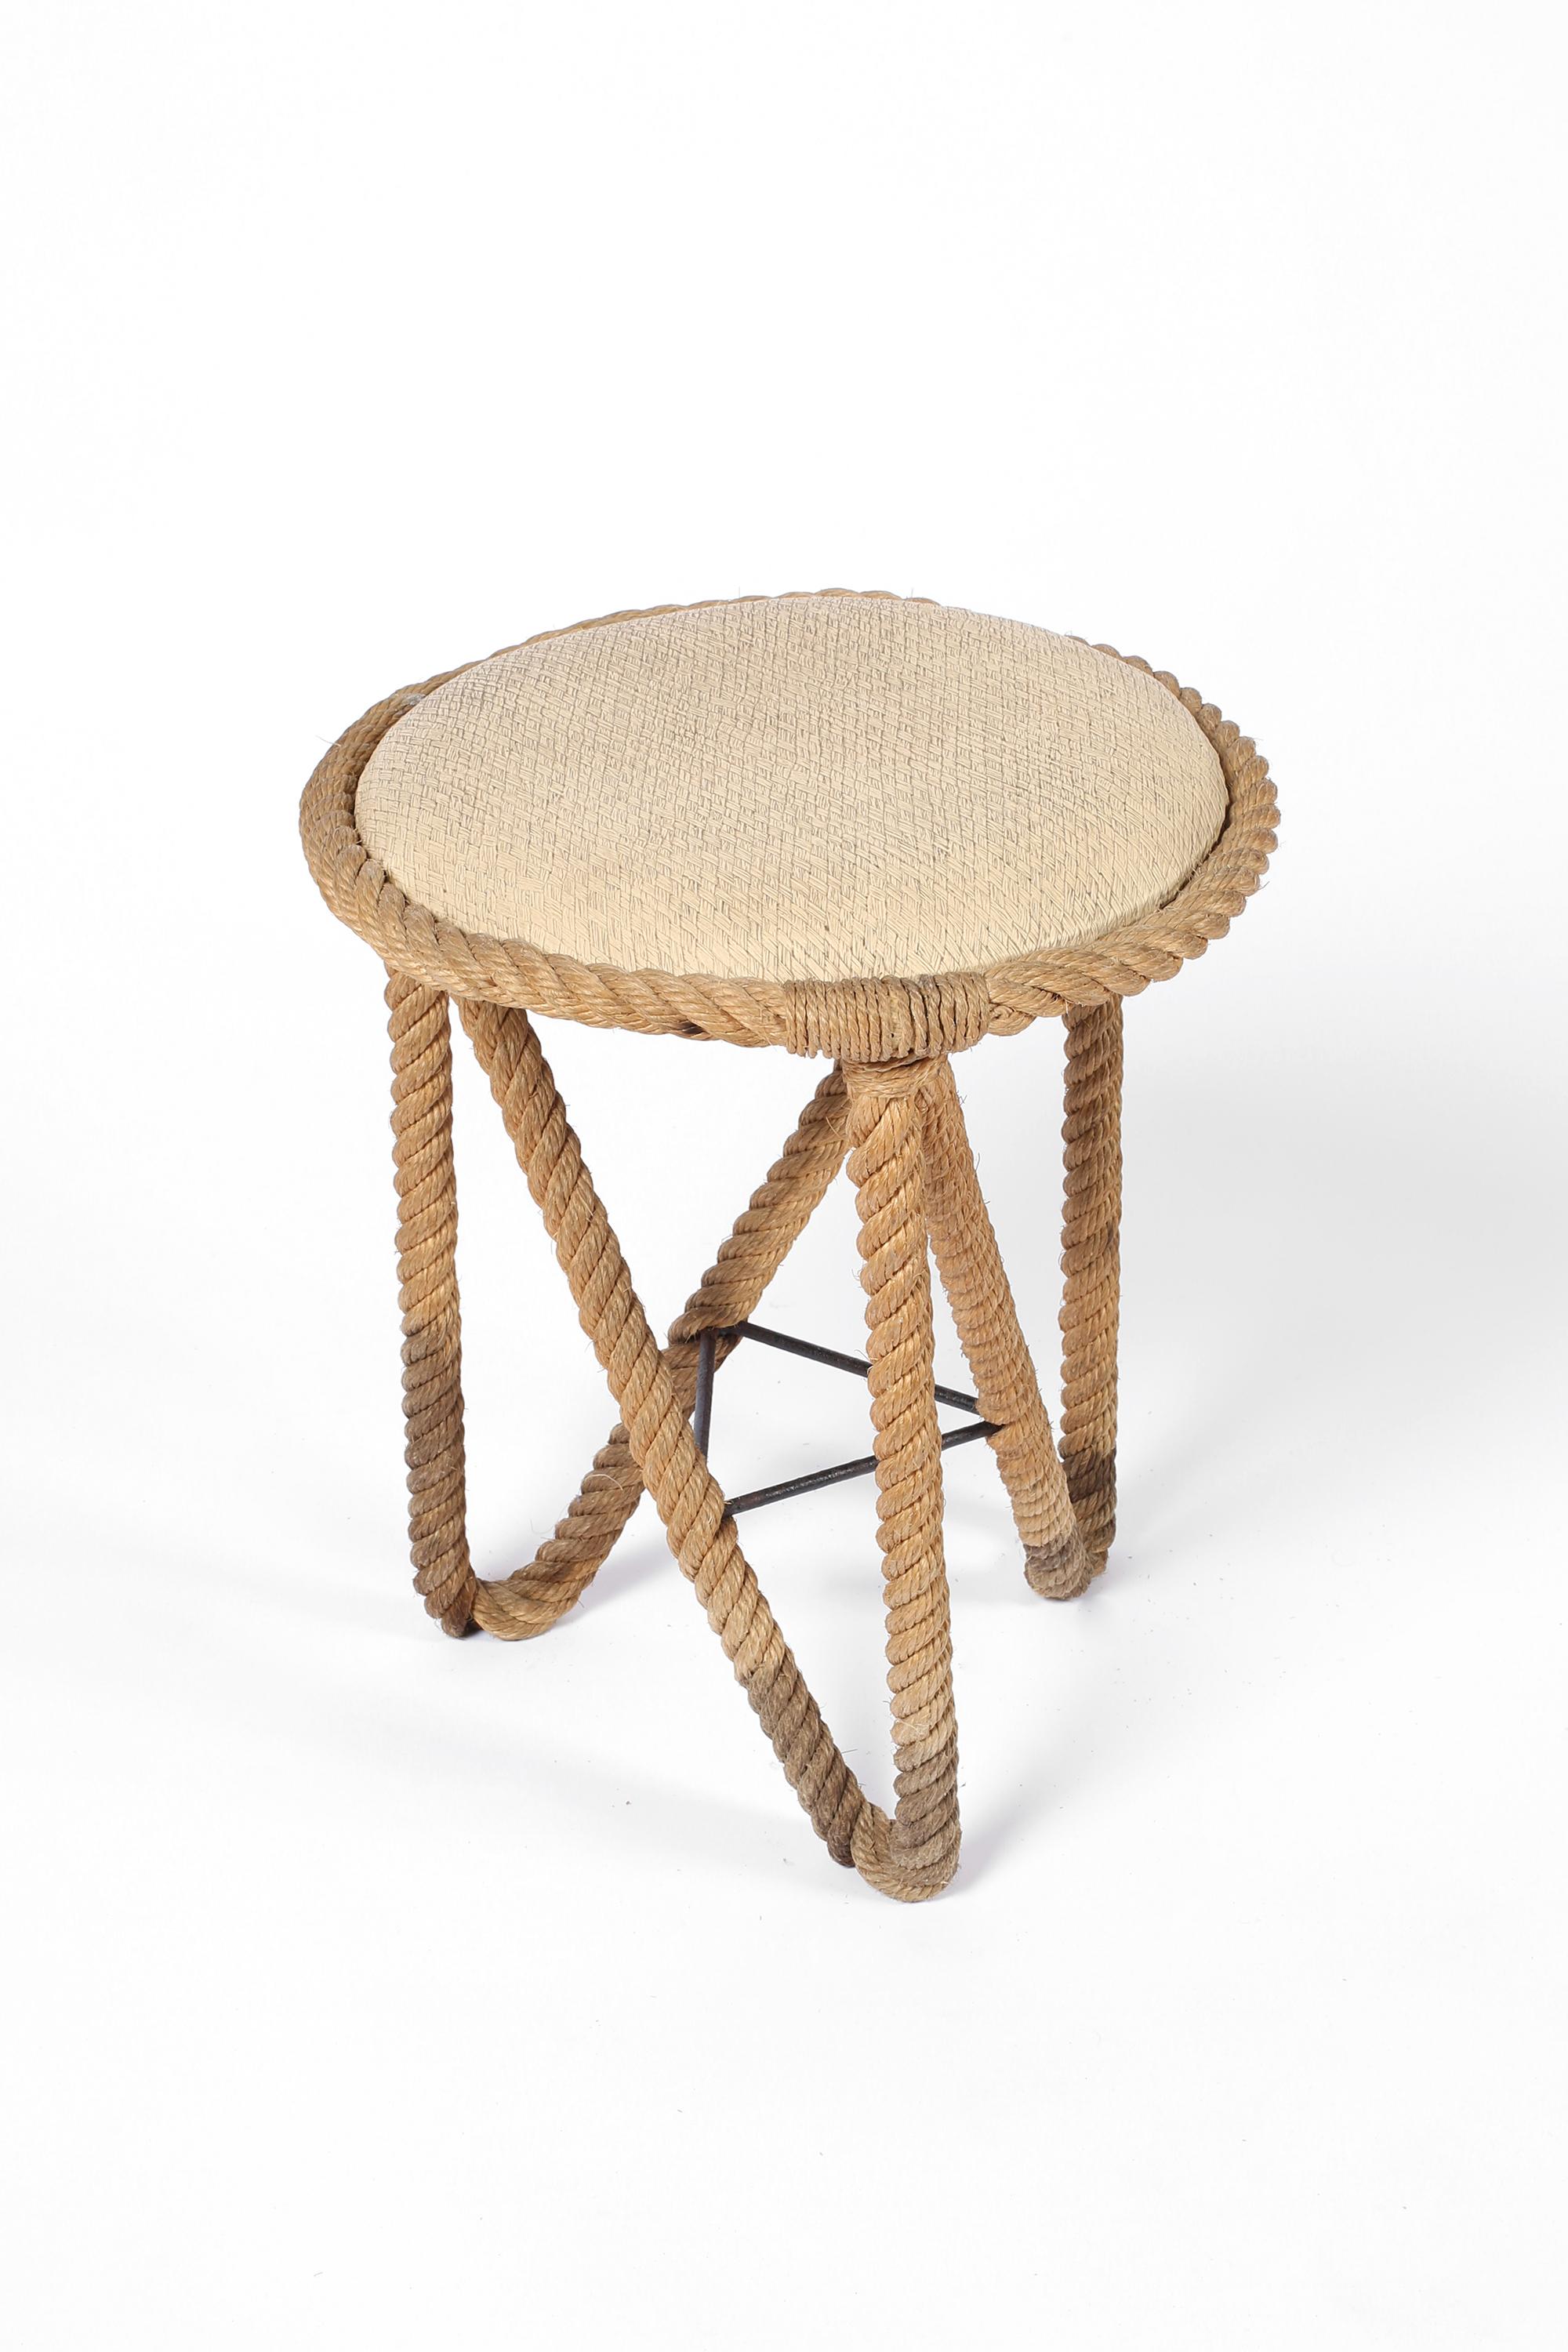 Mid-Century Modern French 1950s Asymmetric Rope Stool by Audoux-Minnet Midcentury Modern